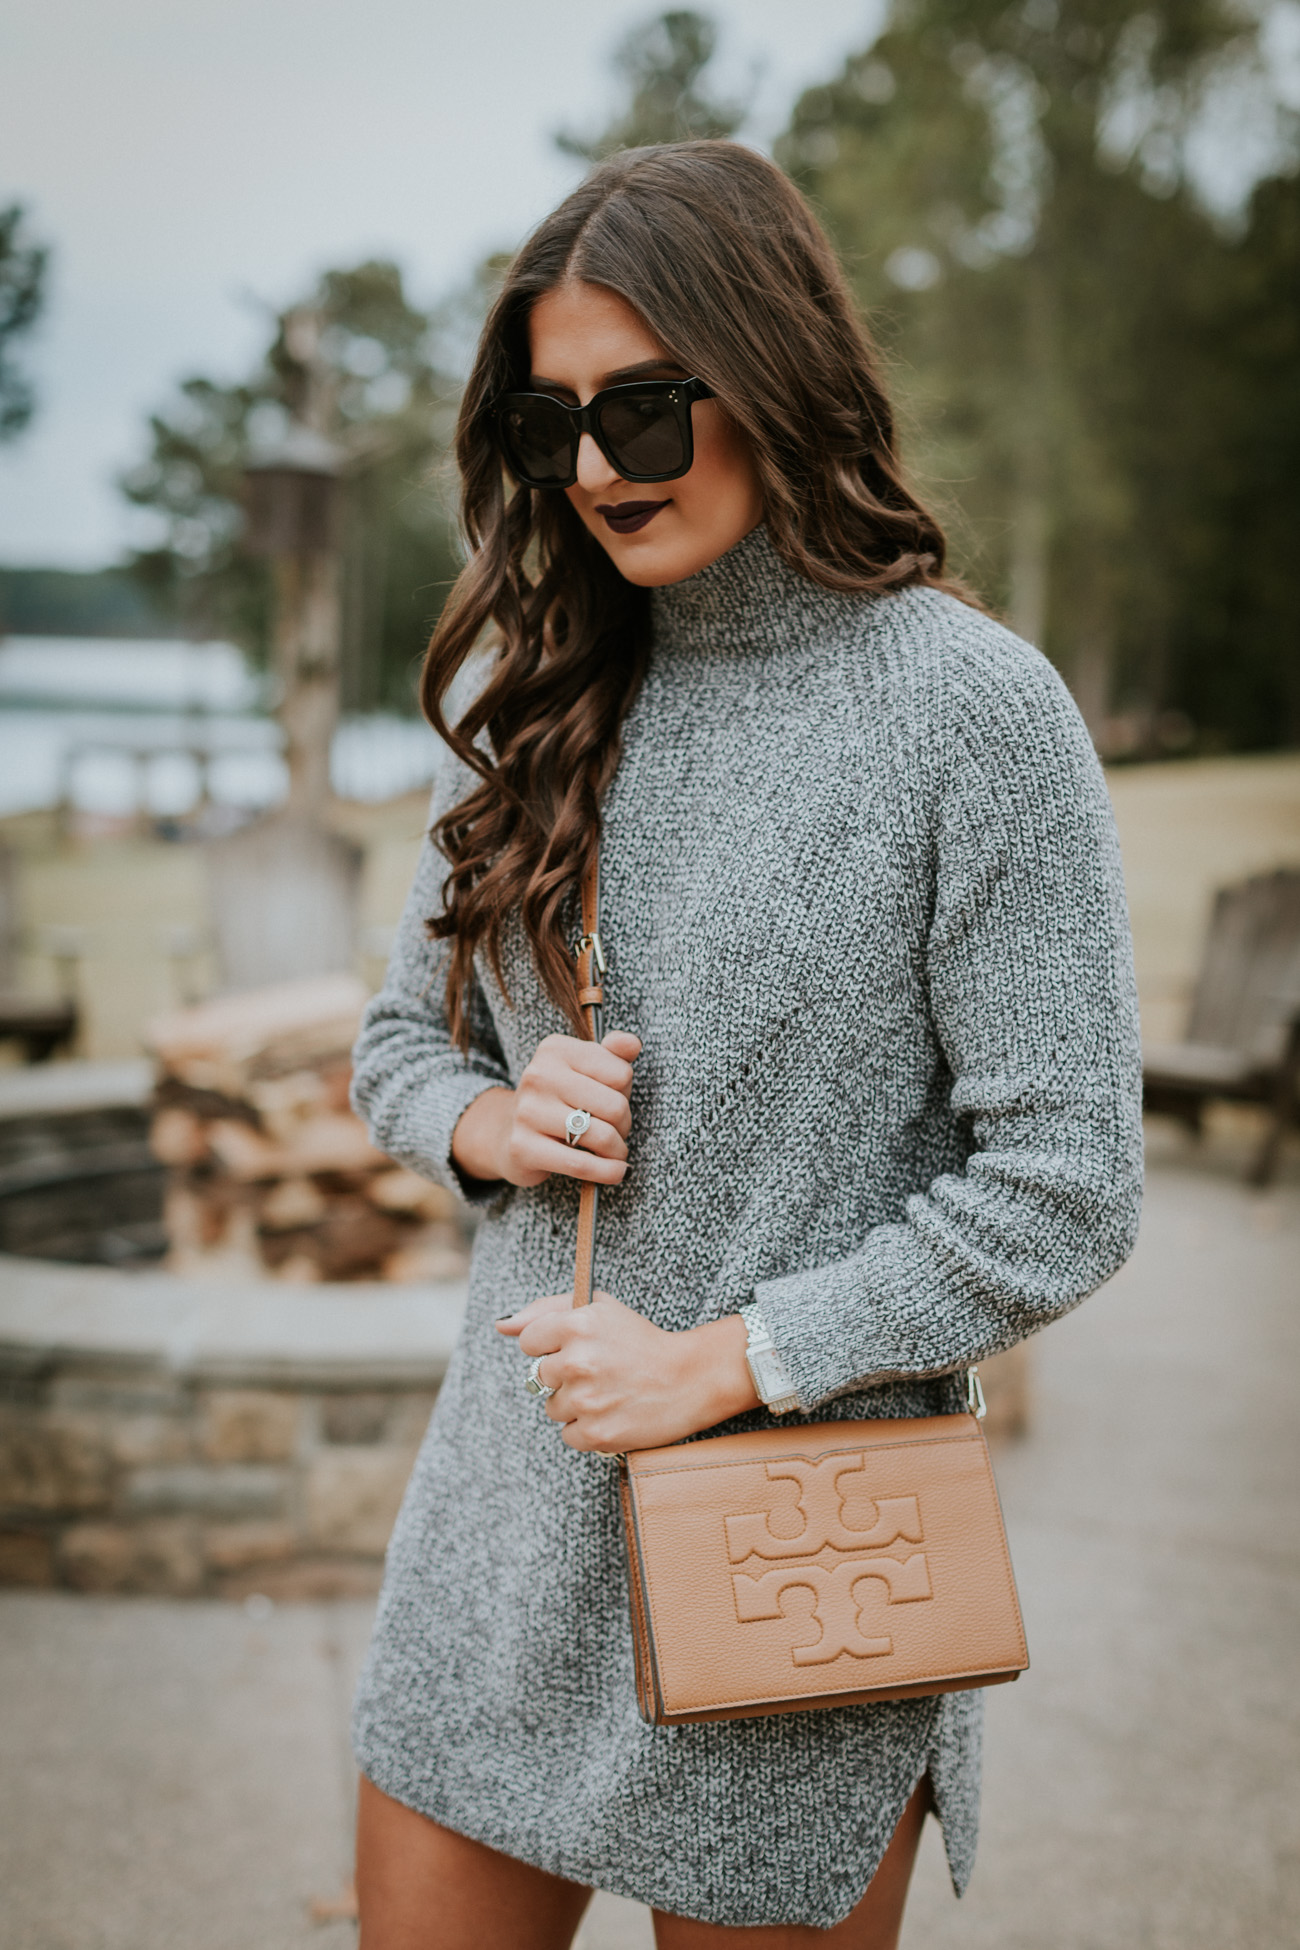 funnel neck sweater dress, over the knee boots, cognac over the knee boots, dolce vita over the knee boots, vince camuto over the knee boots, tory burch crossbody bag, winter lipsticks, fall lipsticks, celine sunglasses, winter style, cute winter outfit, casual winter outfit // grace wainwright a southern drawl